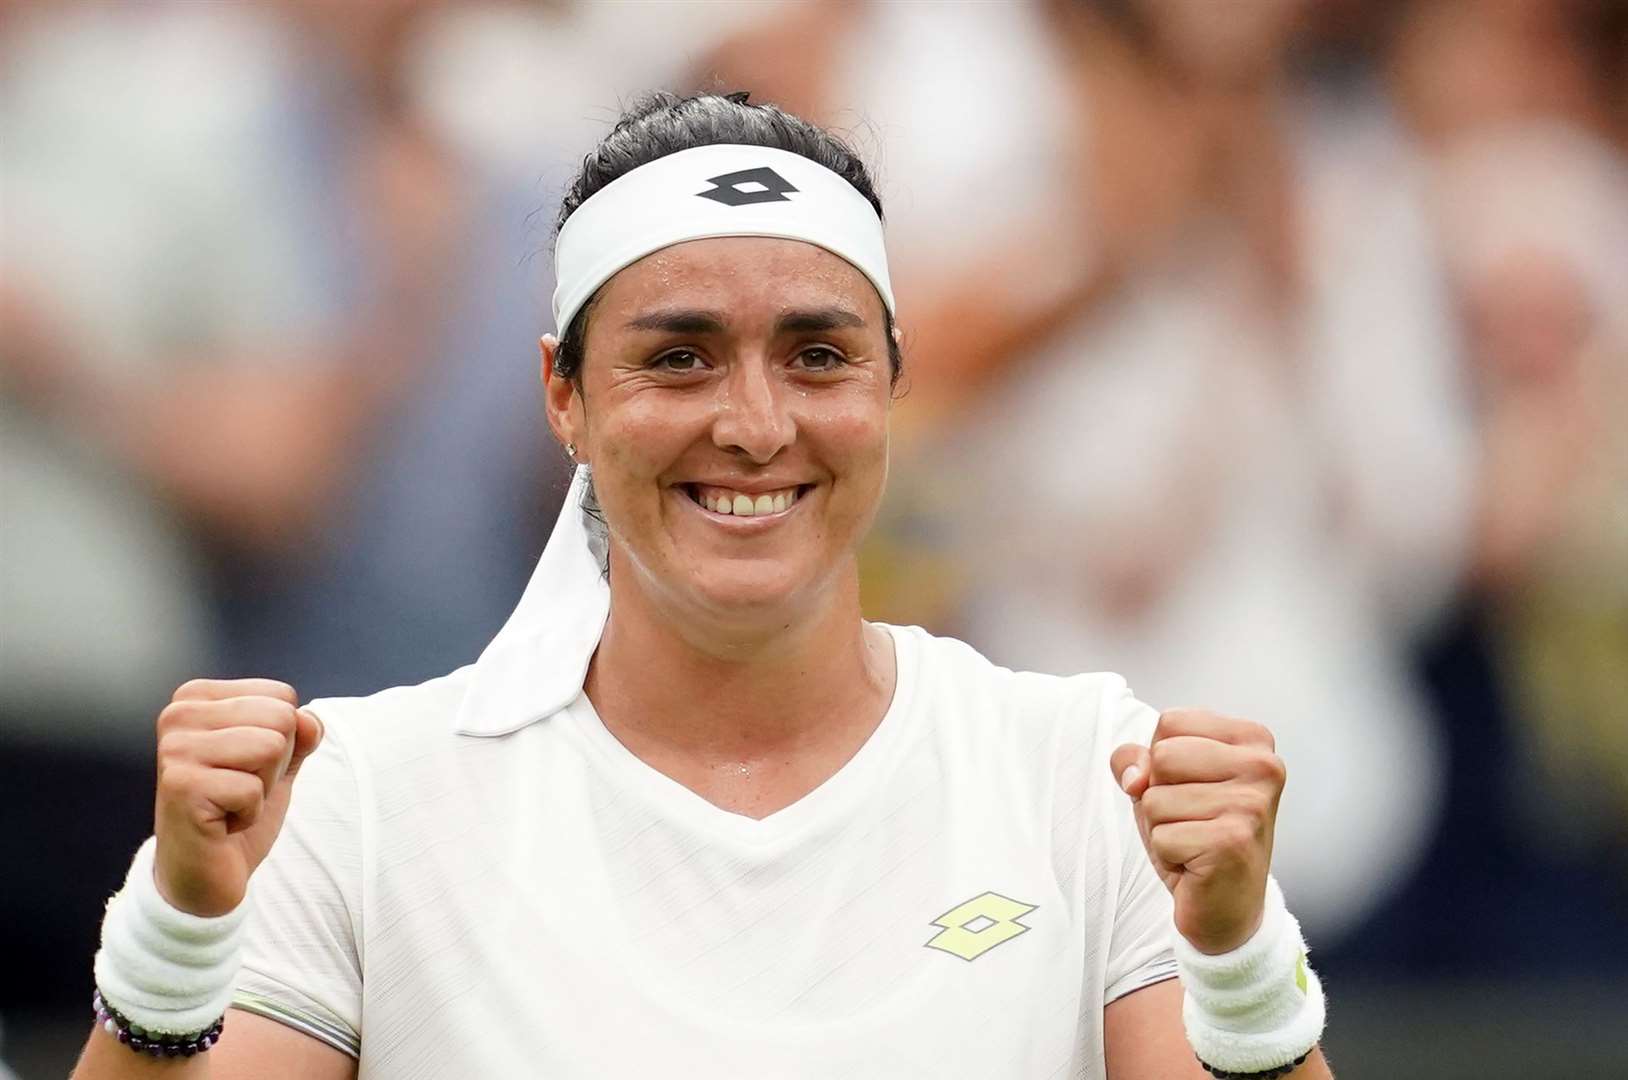 Ons Jabeur celebrates victory over Aryna Sabalenka in the semi-finals at Wimbledon (Victoria Jones/PA)